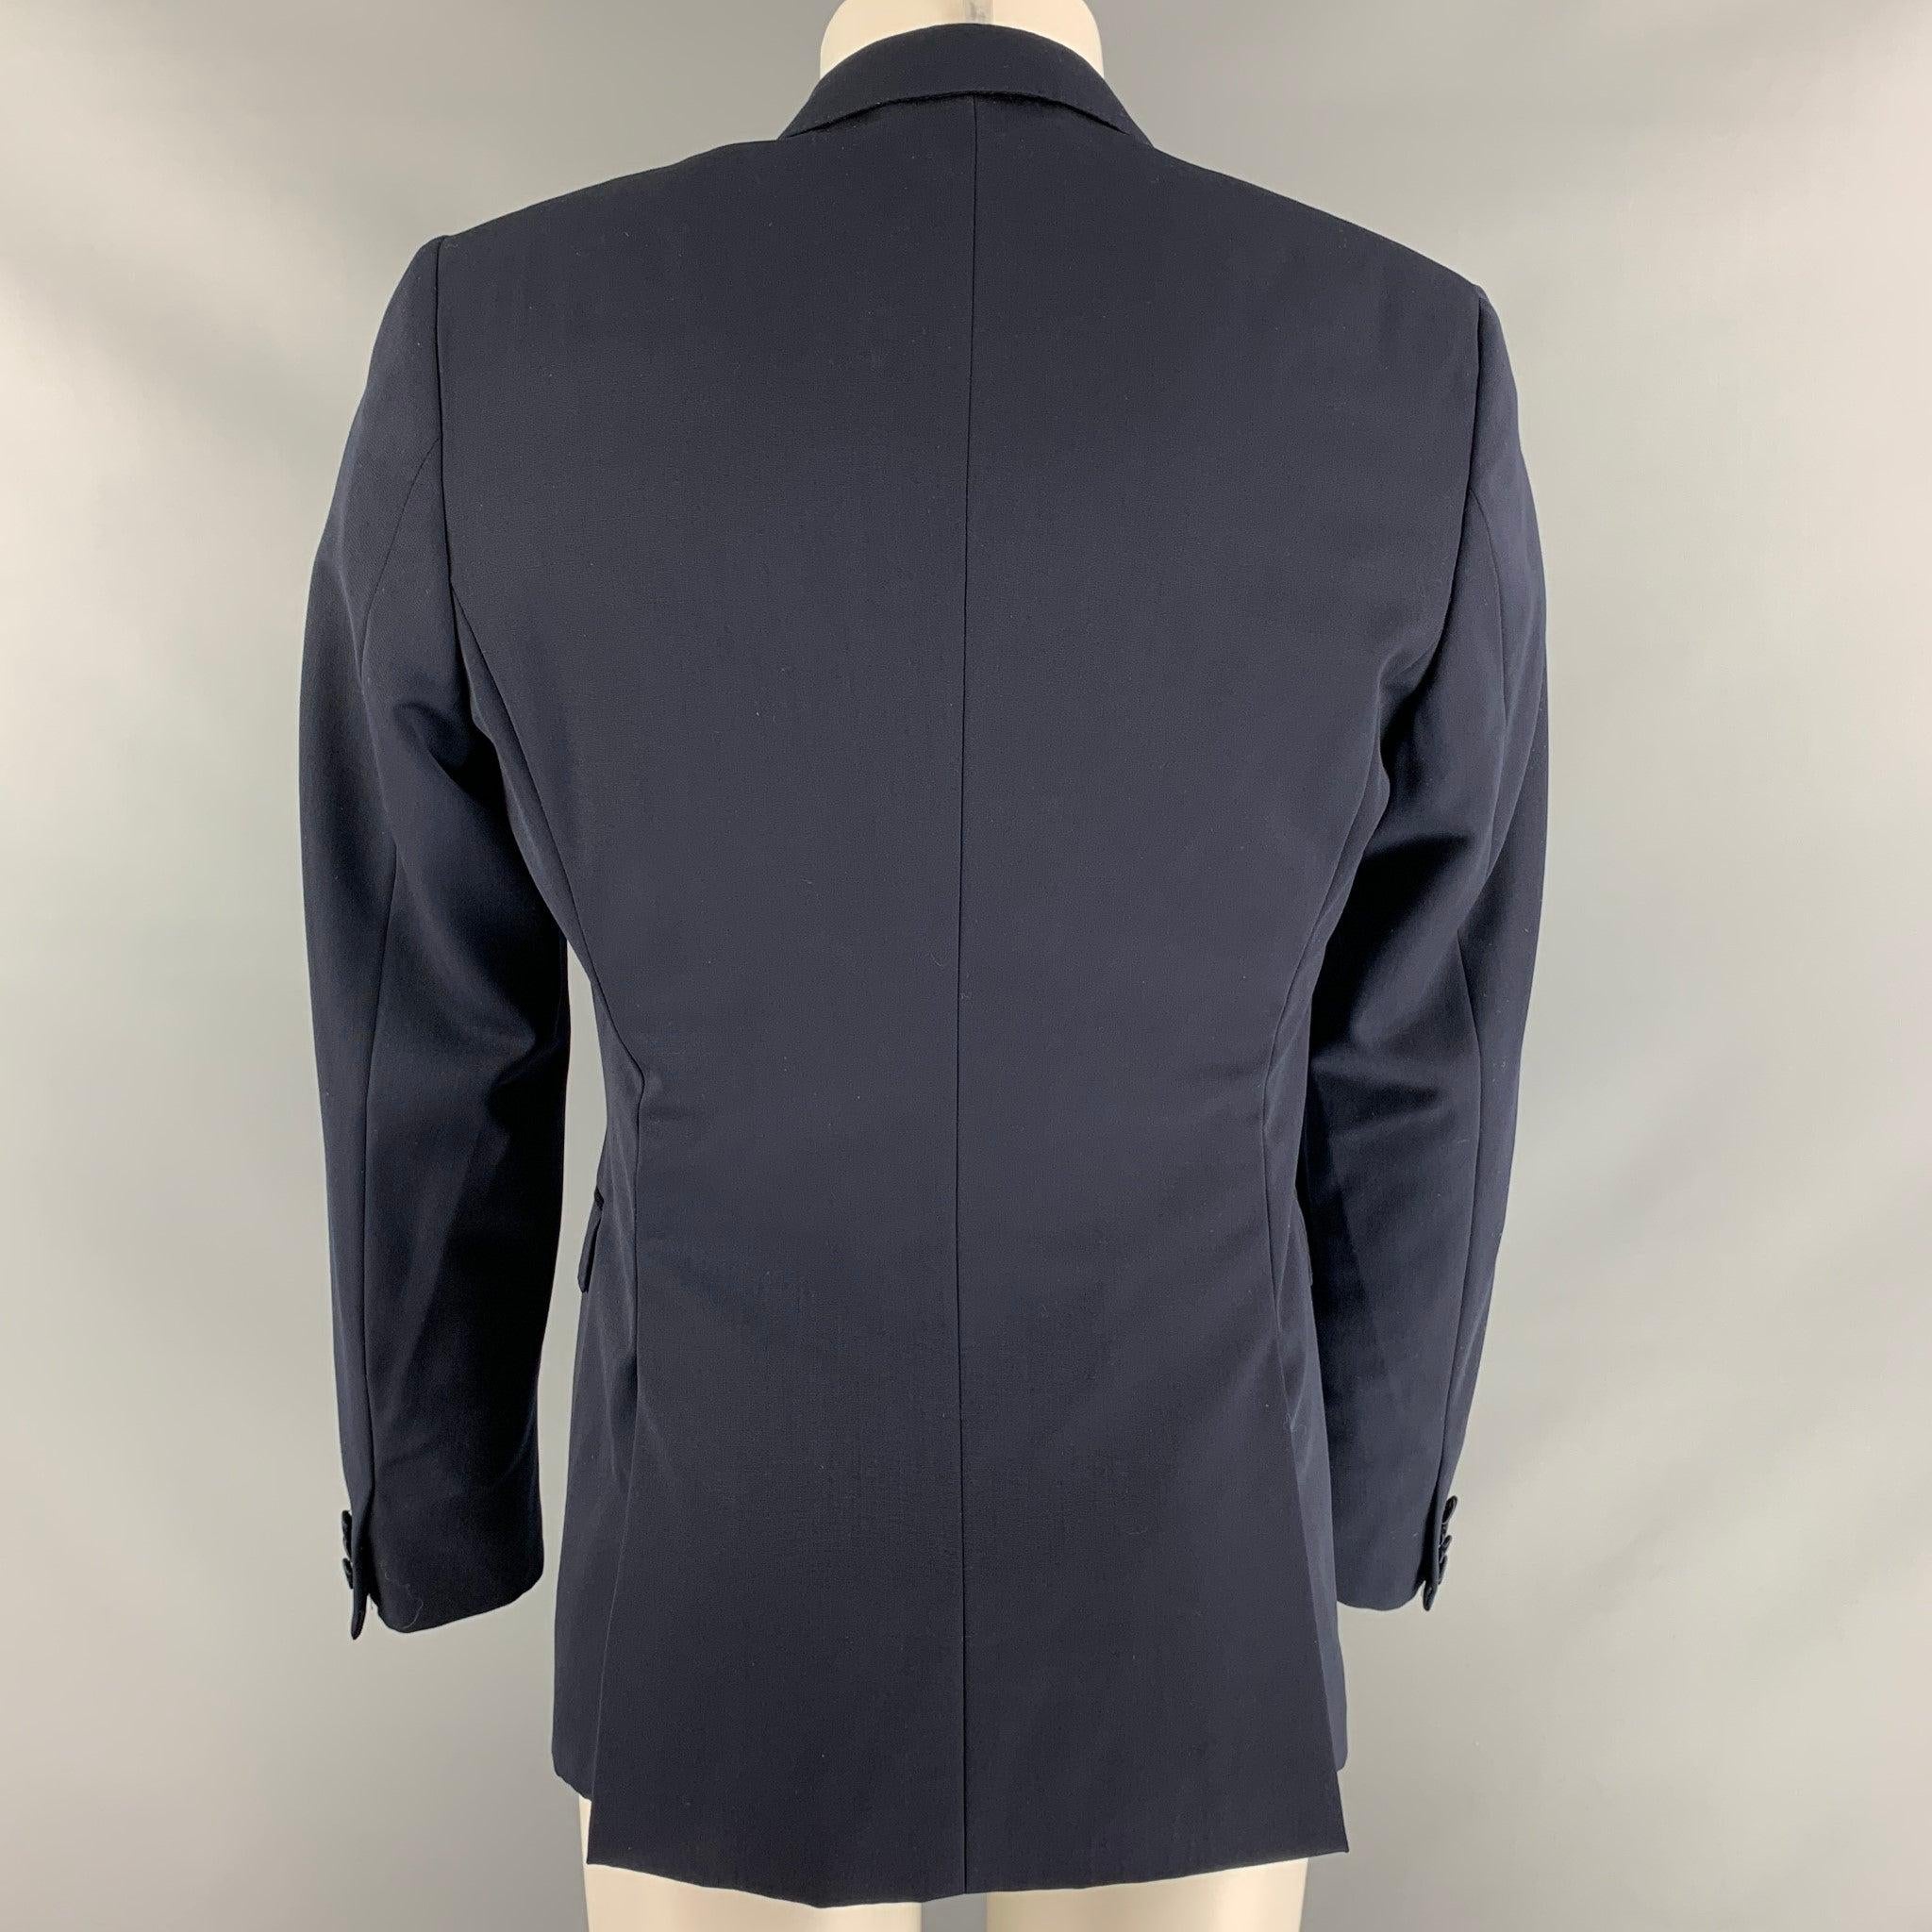 BURBERRY PRORSUM Chest Size 40 Regular Navy Blue Virgin Wool Tuxedo Sport Coat In Excellent Condition For Sale In San Francisco, CA